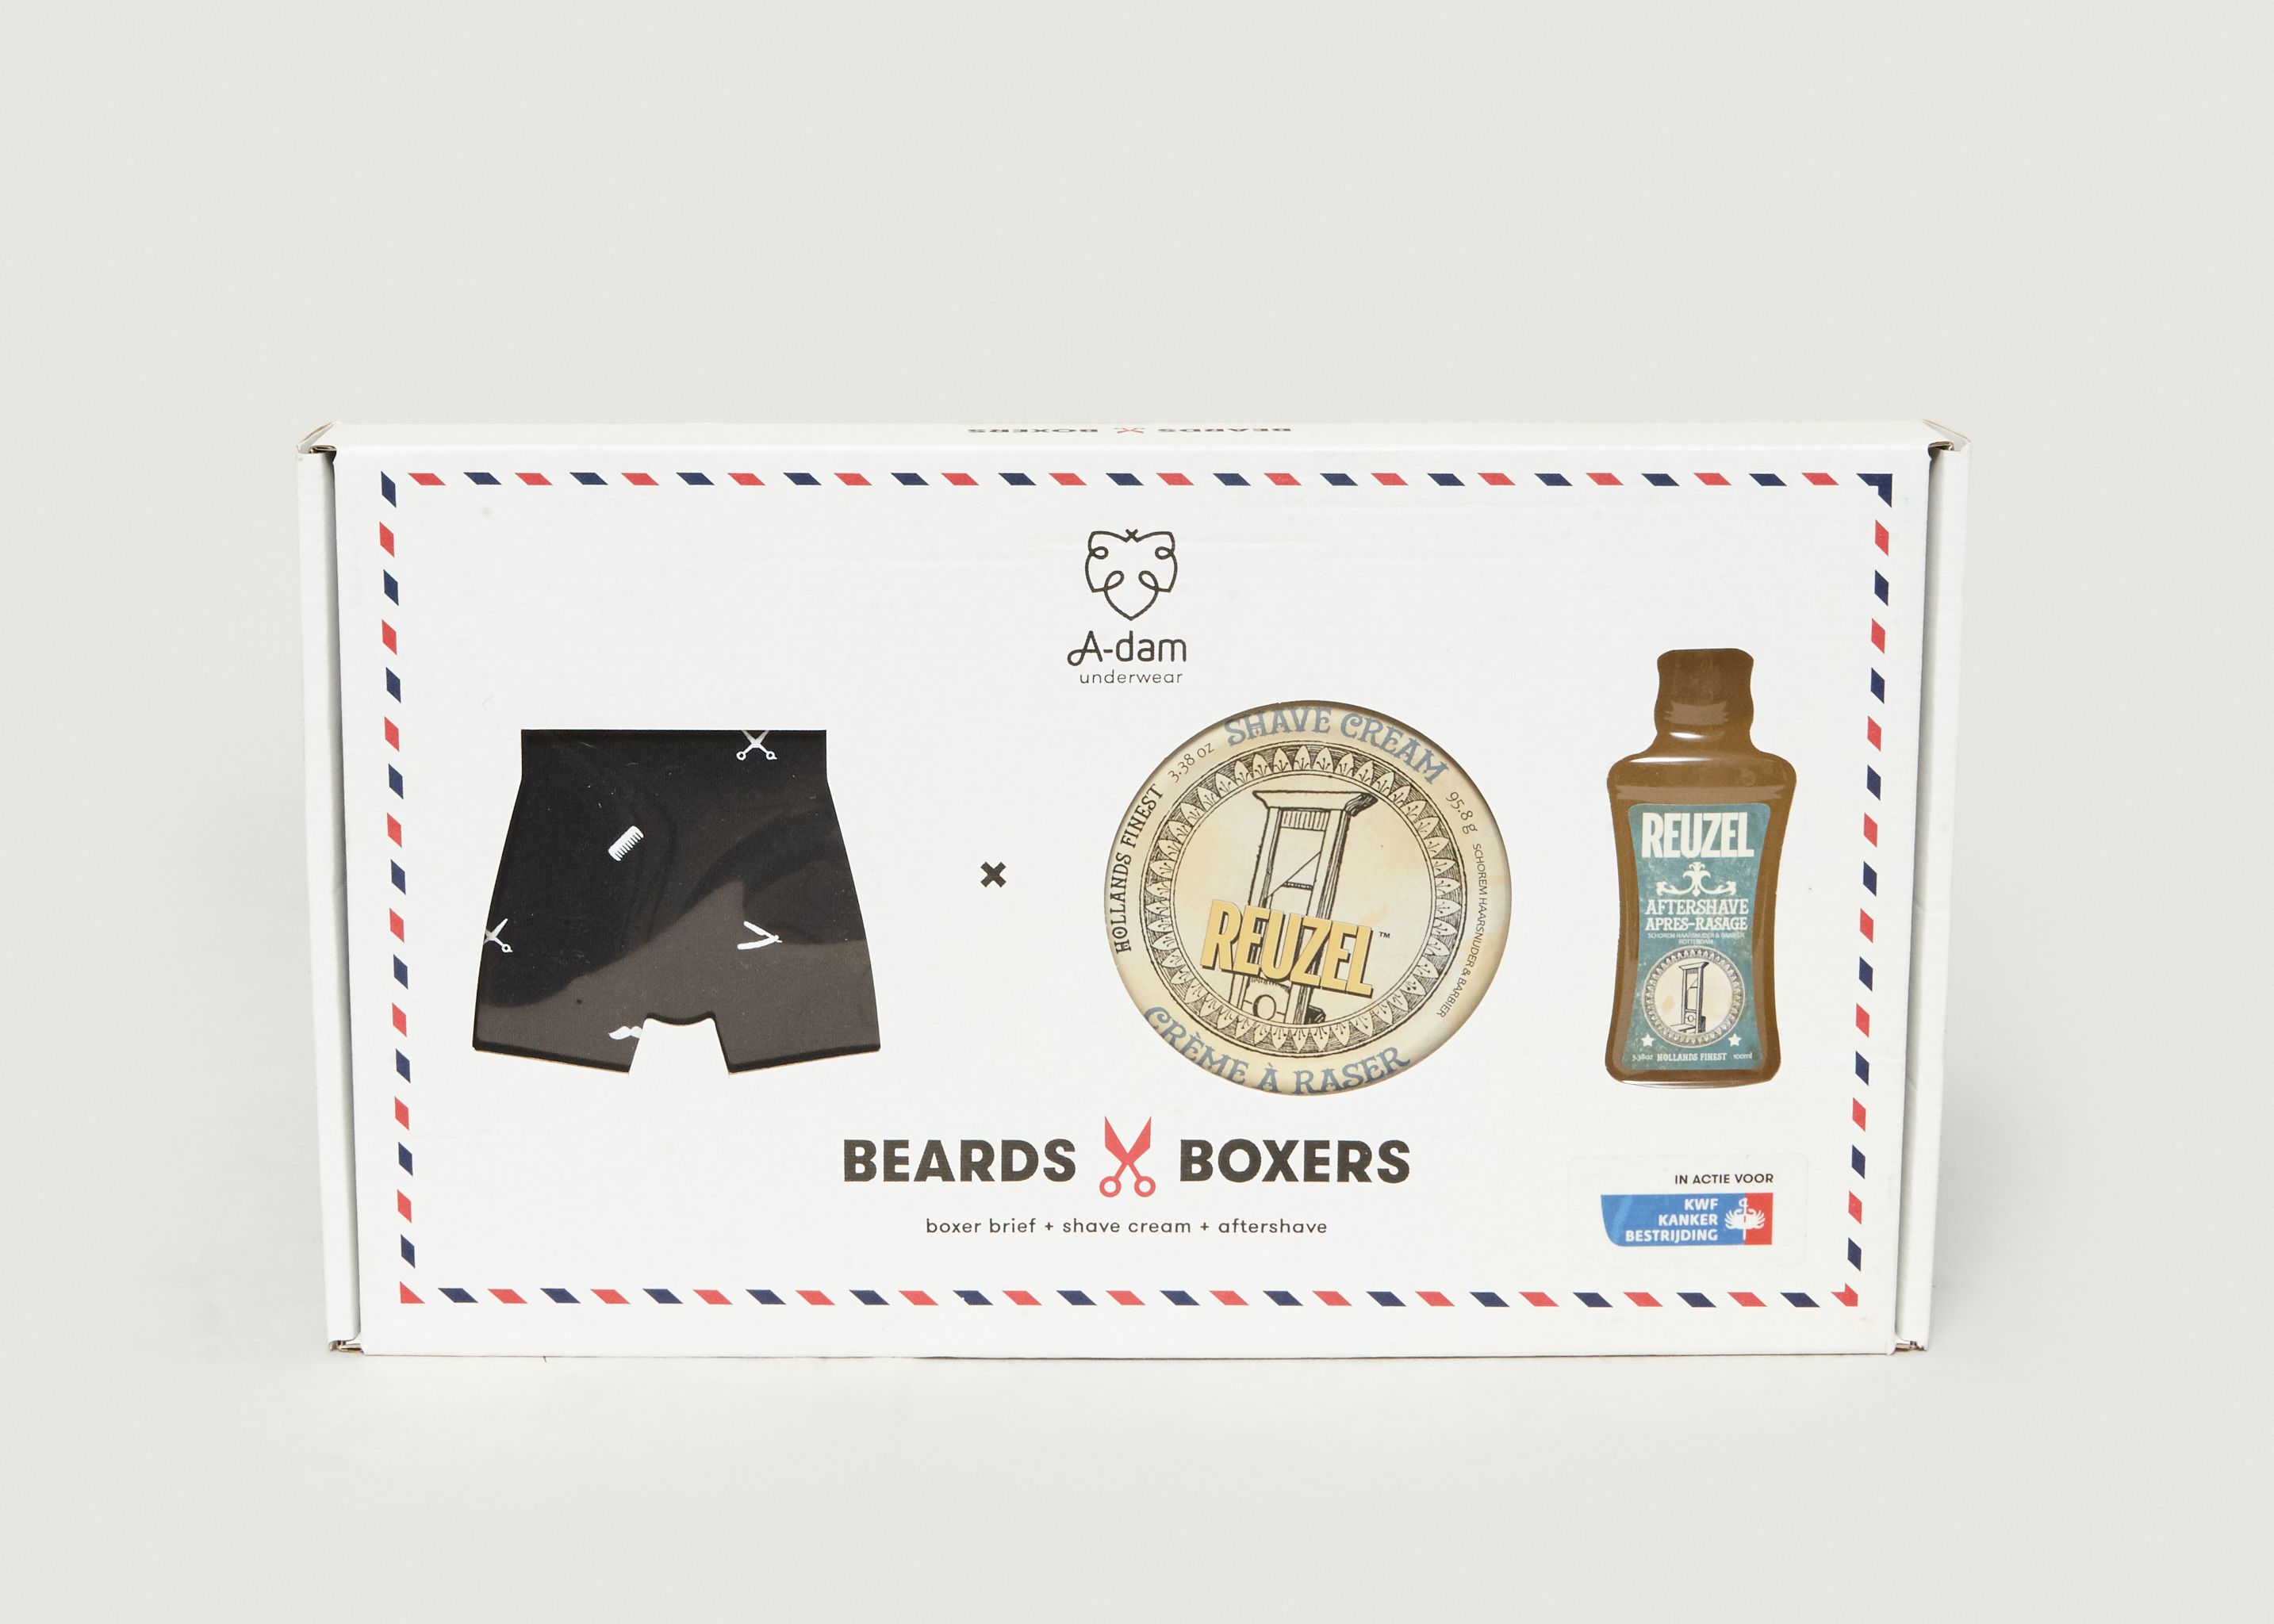 Beards and Boxers gift box - A-dam